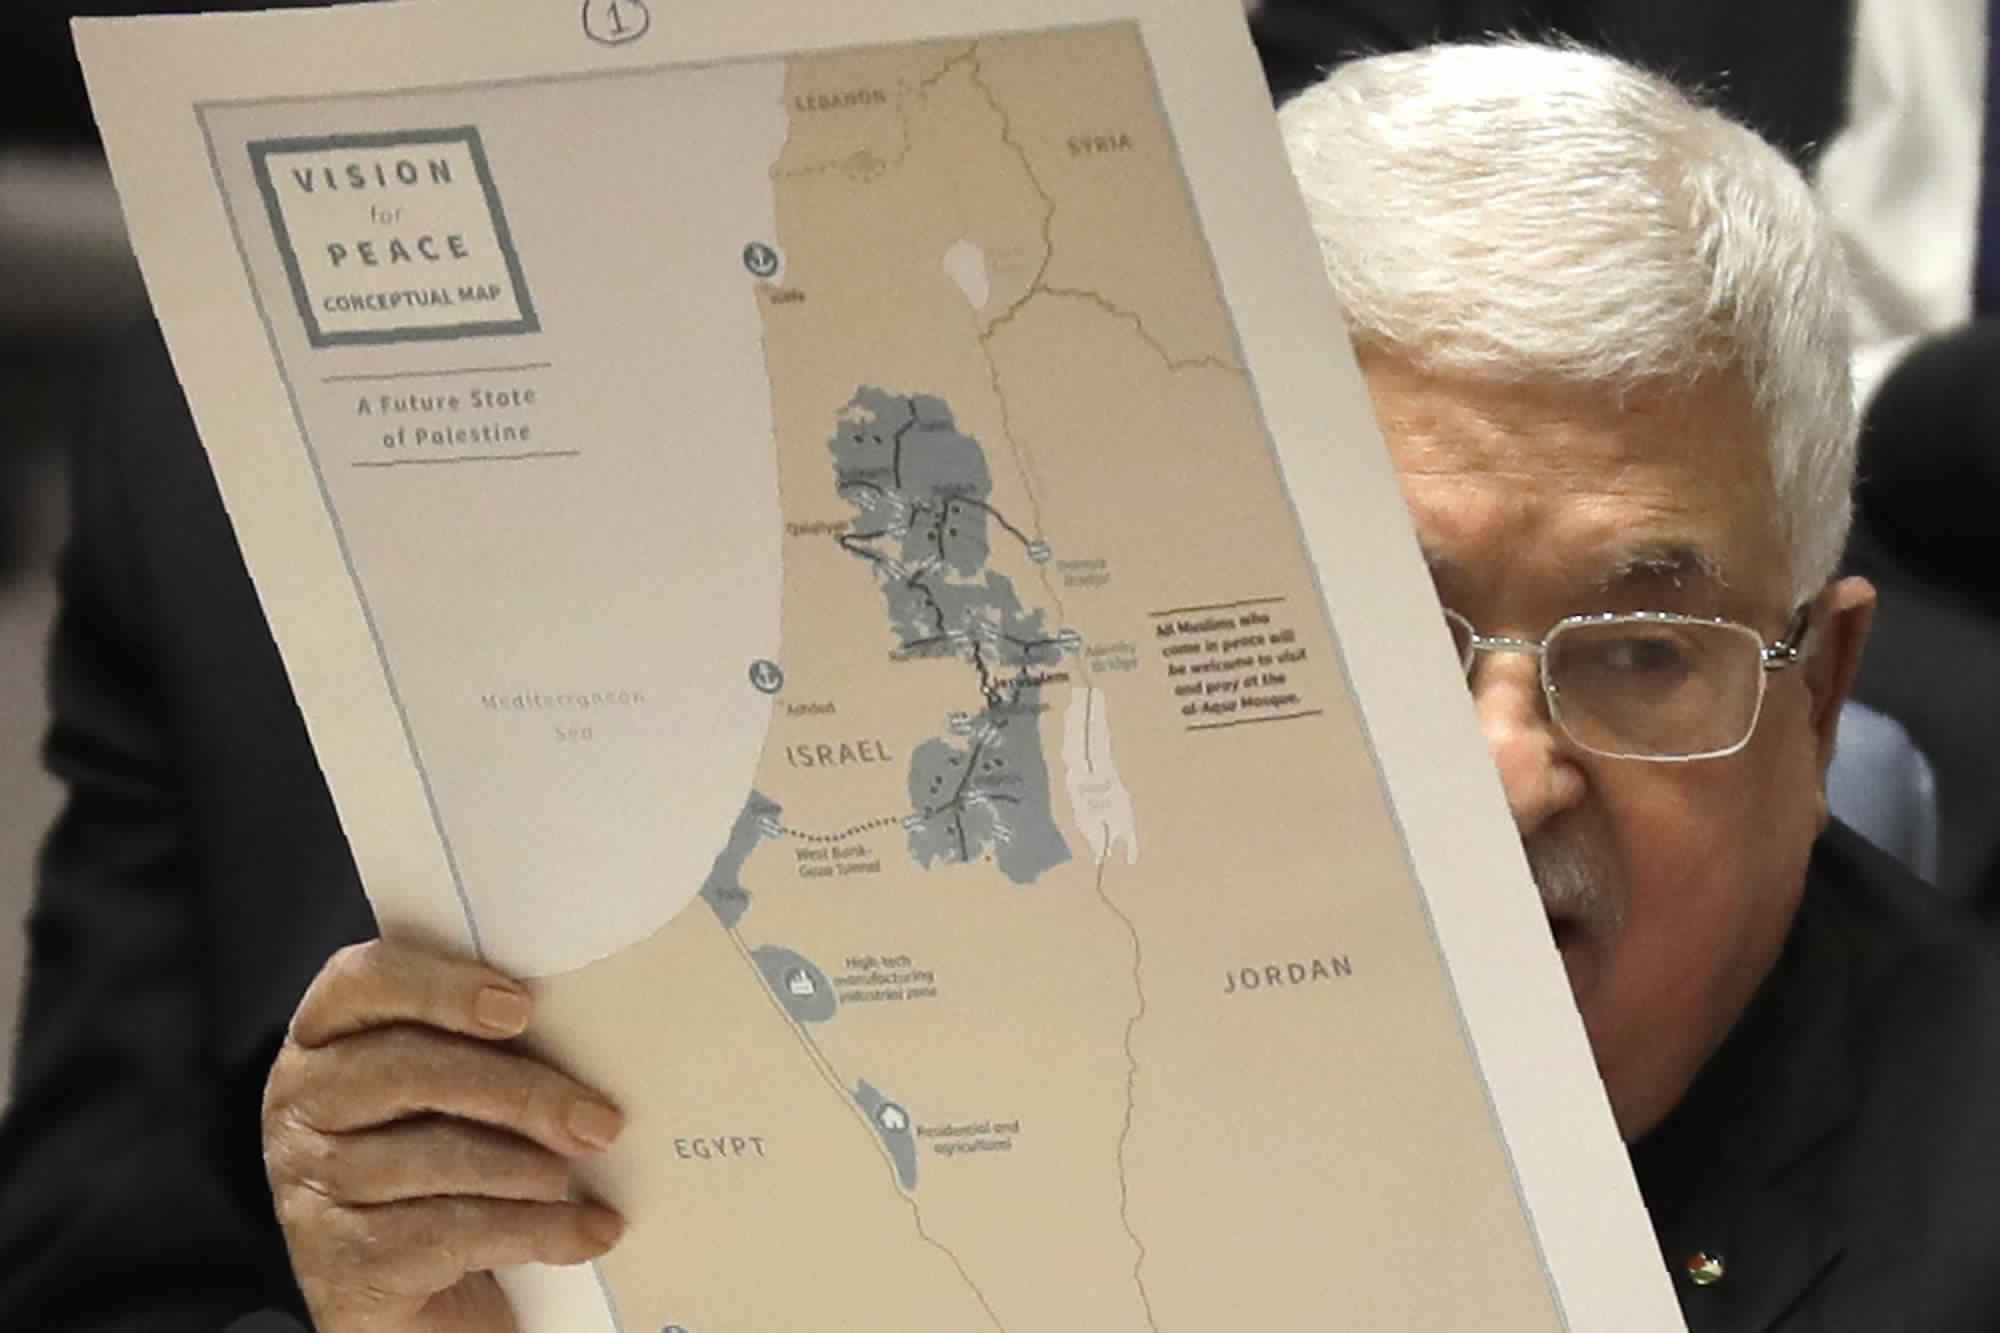 Palestinian President Mahmoud Abbas shows UN members a map of Israel that he claims belongs to the Palestinians, who have never had sovereignty over any territory in the Holy Land. FLAME publishes editorials that refute the lies of Palestinian leadership, the UN and the media. 